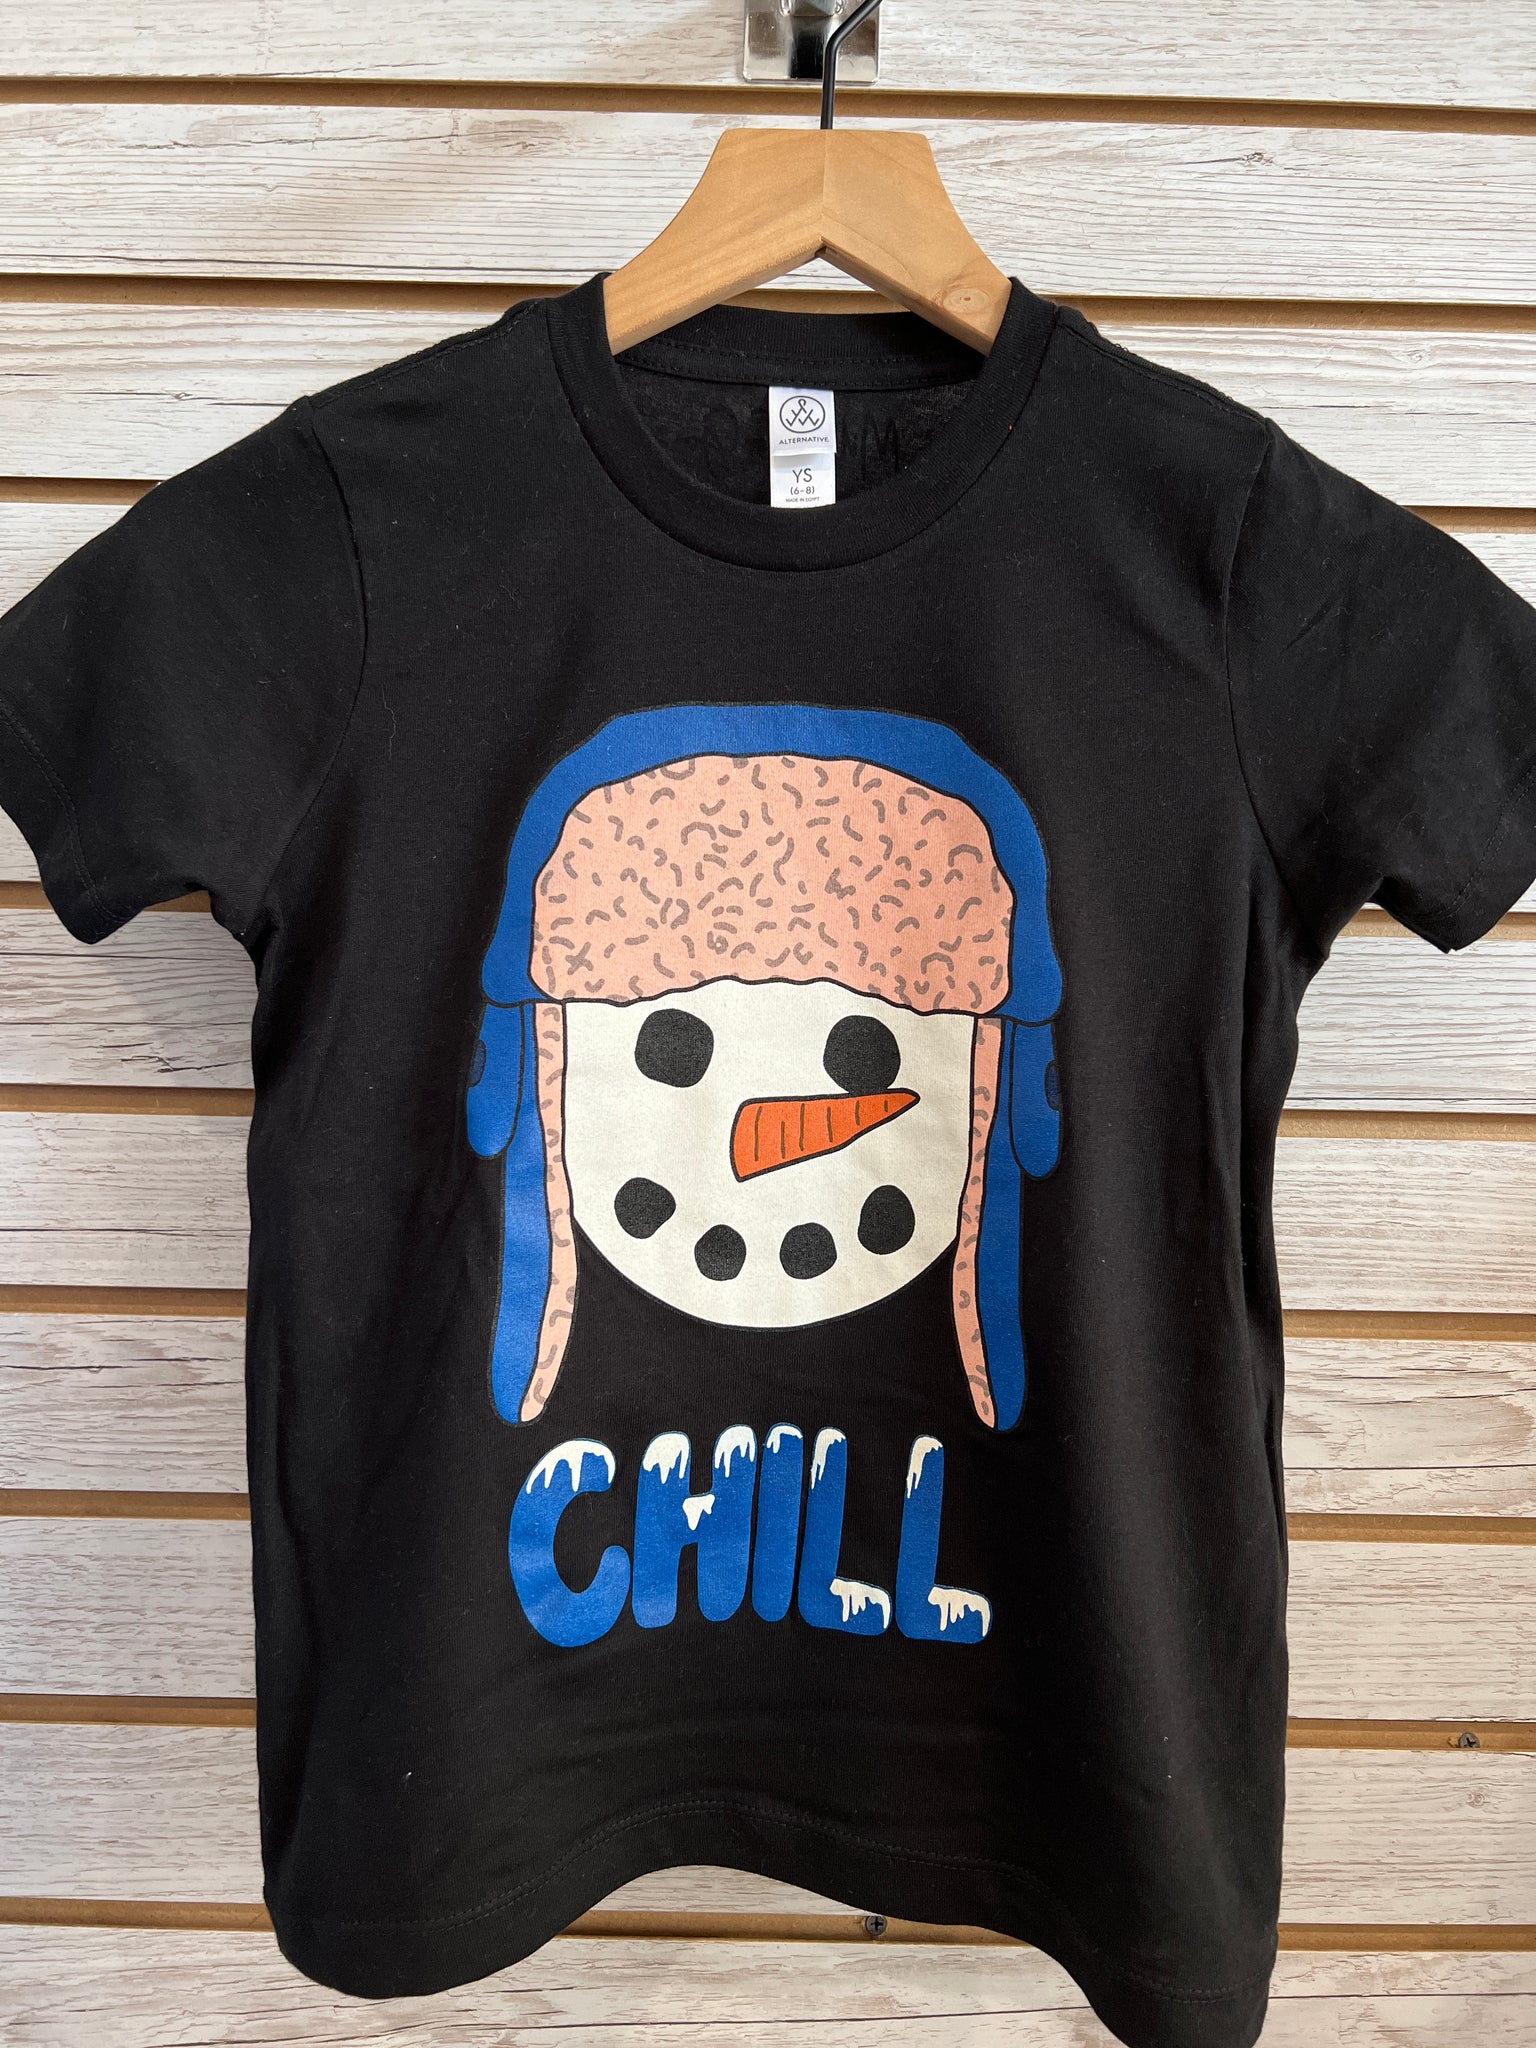 CHILL youth tee